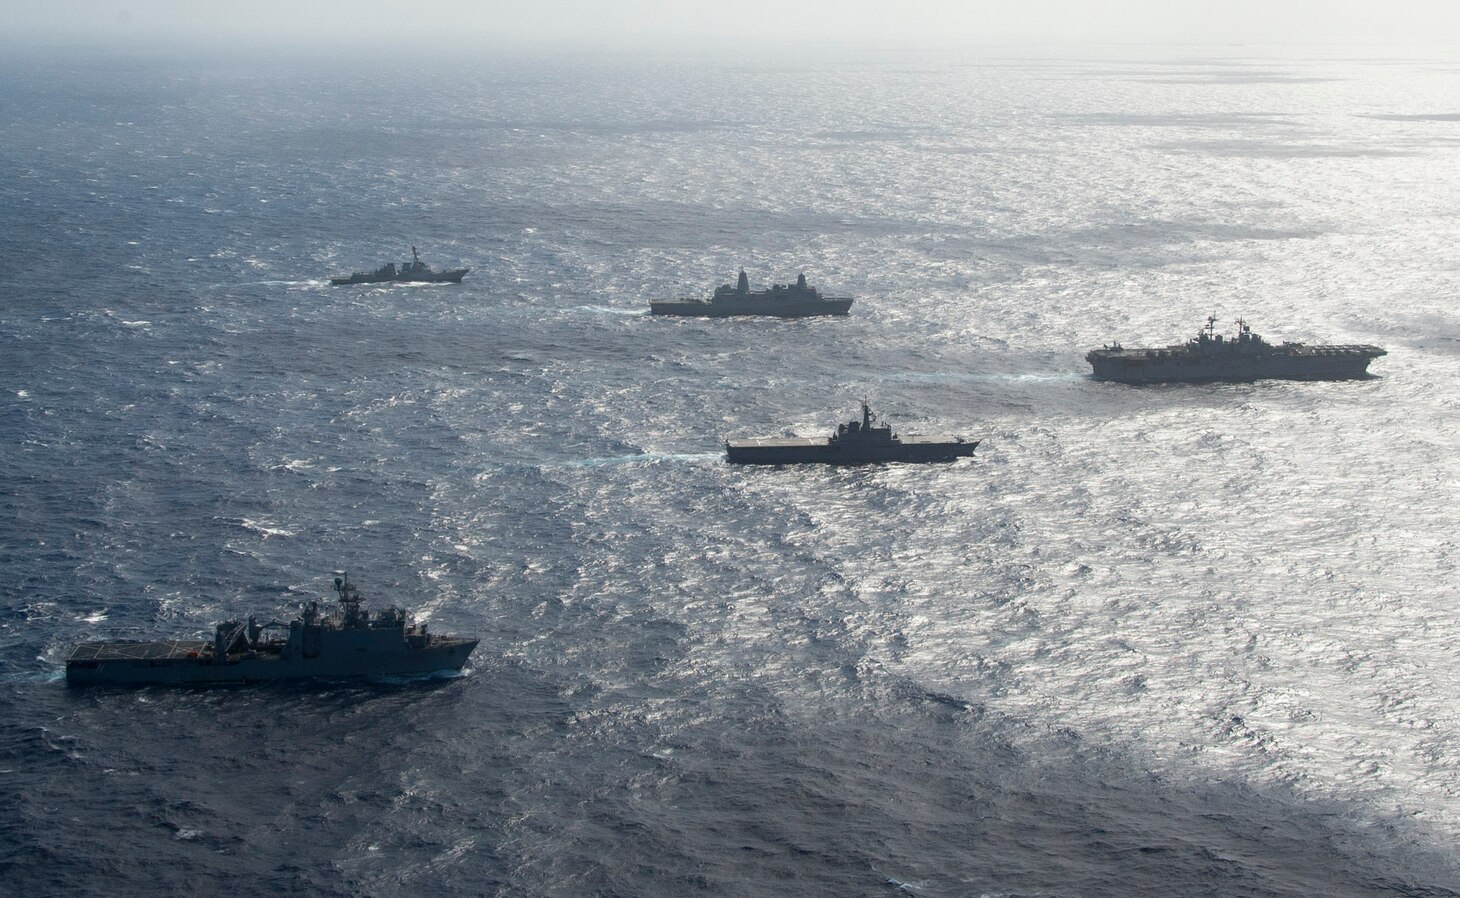 The amphibious assault ship USS Wasp (LHD 1), along with the transport dock ship USS Green Bay (LPD 20), dock landing ship USS Ashland (LSD 48), and Arleigh Burke class guided missile destroyer USS Shoup (DDG 86), sail alongside the Japan Maritime Self Defense Force (JMSDF) amphibious transport dock ship JS Osumi (LST 4001) during a Passing Exercise (PASSEX) in the Philippine Sea Aug. 26, 2018. PASSEX enabled the Wasp ARG and the JMSDF a chance to practice communications and maneuvering procedures, and enhance combined amphibious capabilities. The Wasp ARG is currently operating in the region to enhance interoperability with partners and serve as a ready-response force for any type of contingency.